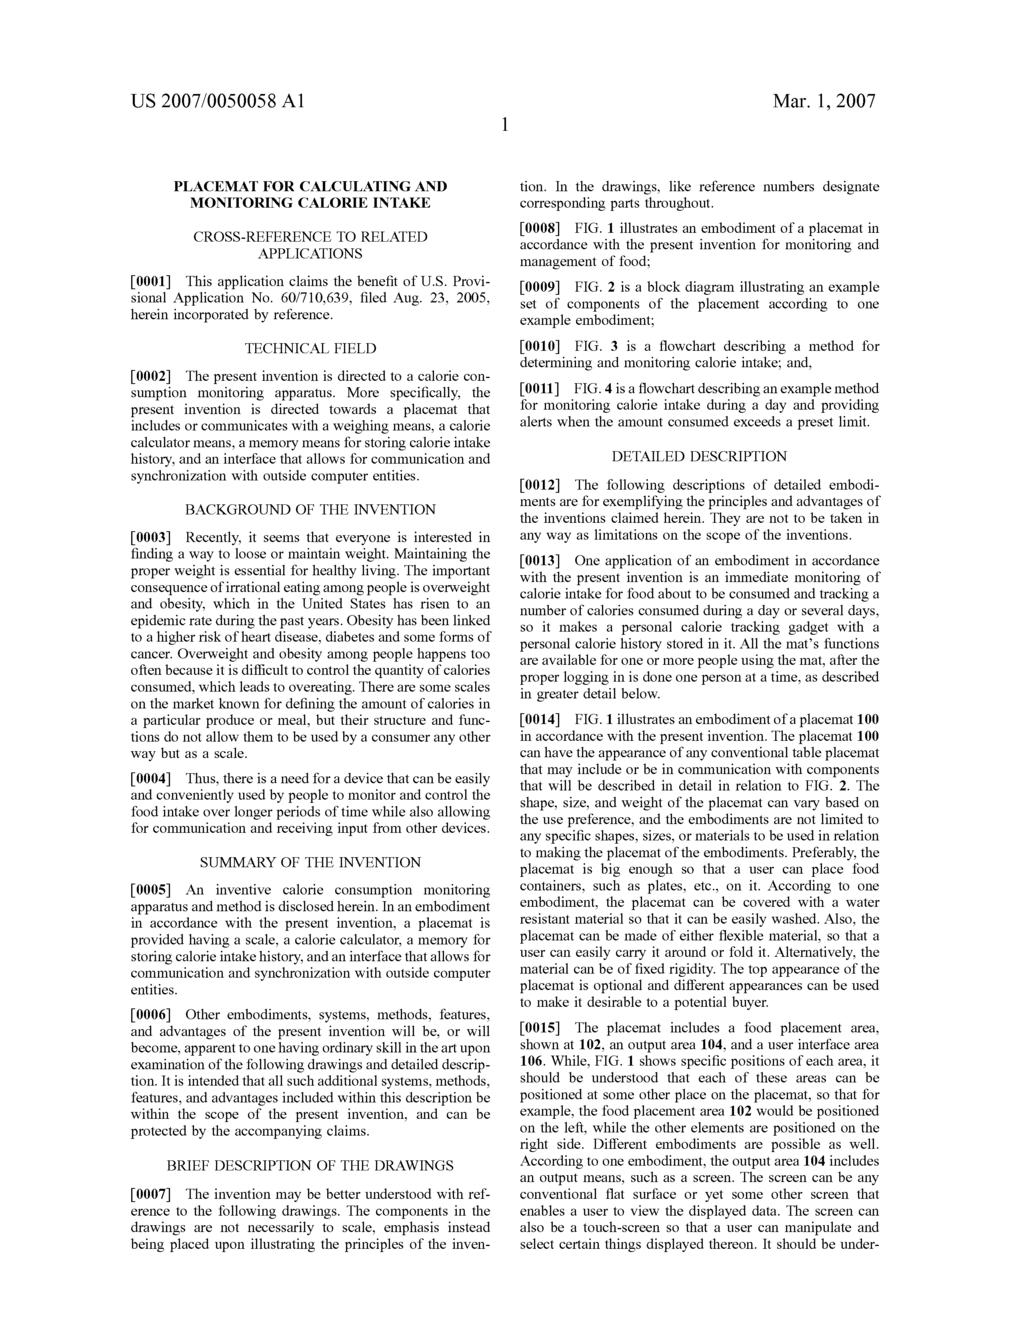 US 2007/0050.058 A1 Mar. 1, 2007 PLACEMAT FOR CALCULATING AND MONITORING CALORE INTAKE CROSS-REFERENCE TO RELATED APPLICATIONS 0001) This application claims the benefit of U.S. Provi sional Application No.